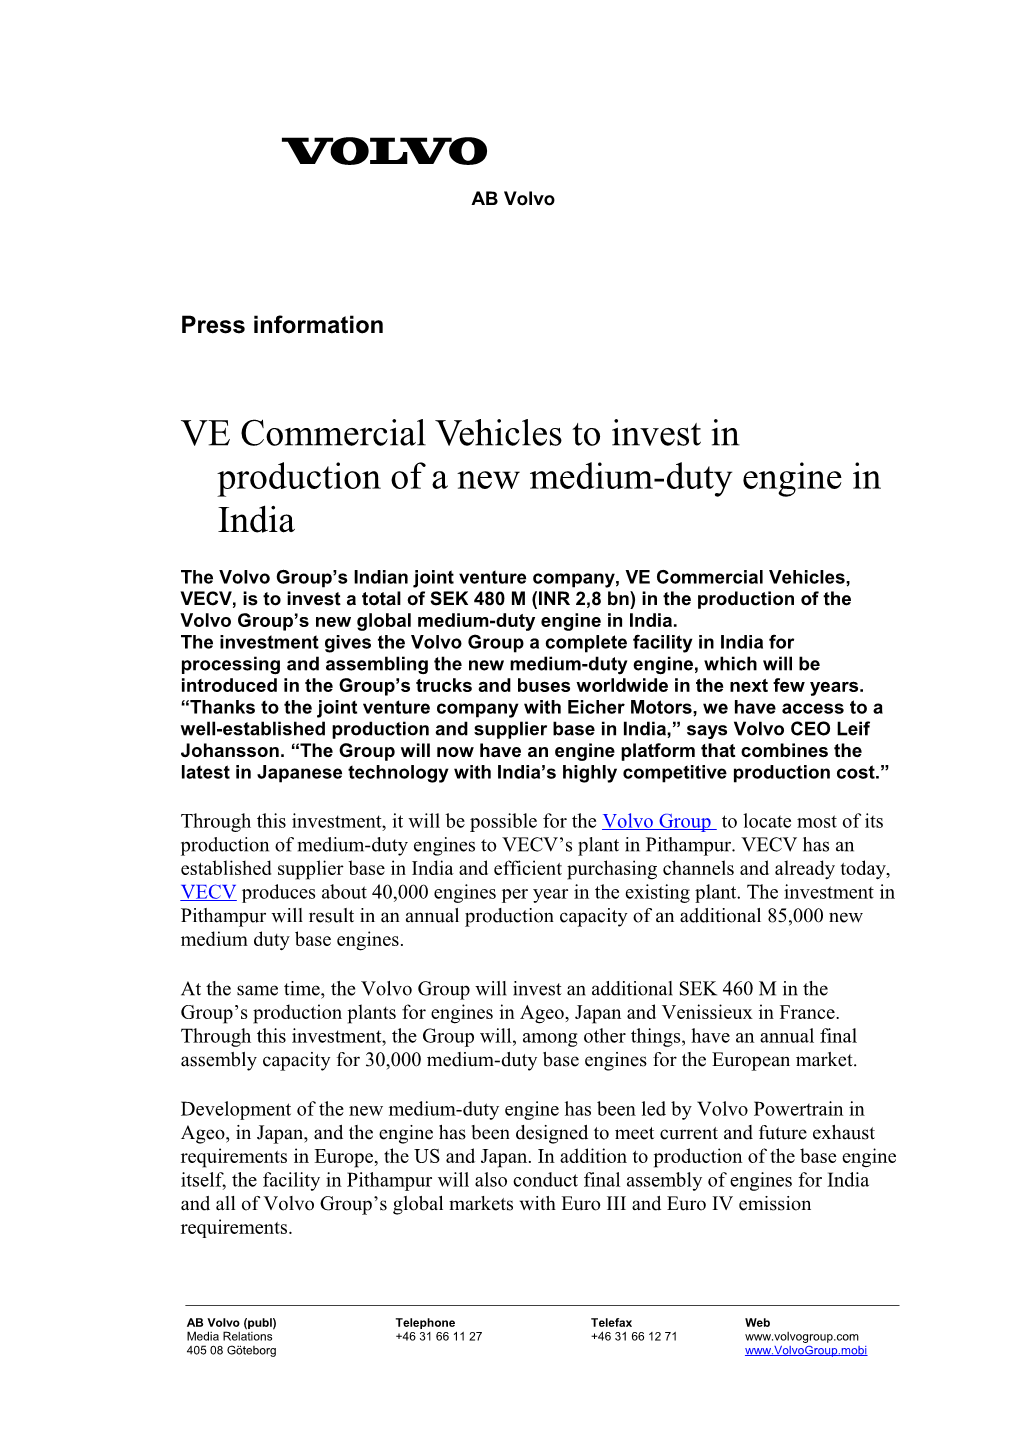 VE Commercial Vehicles to Invest in Production of a New Medium-Duty Enginein India